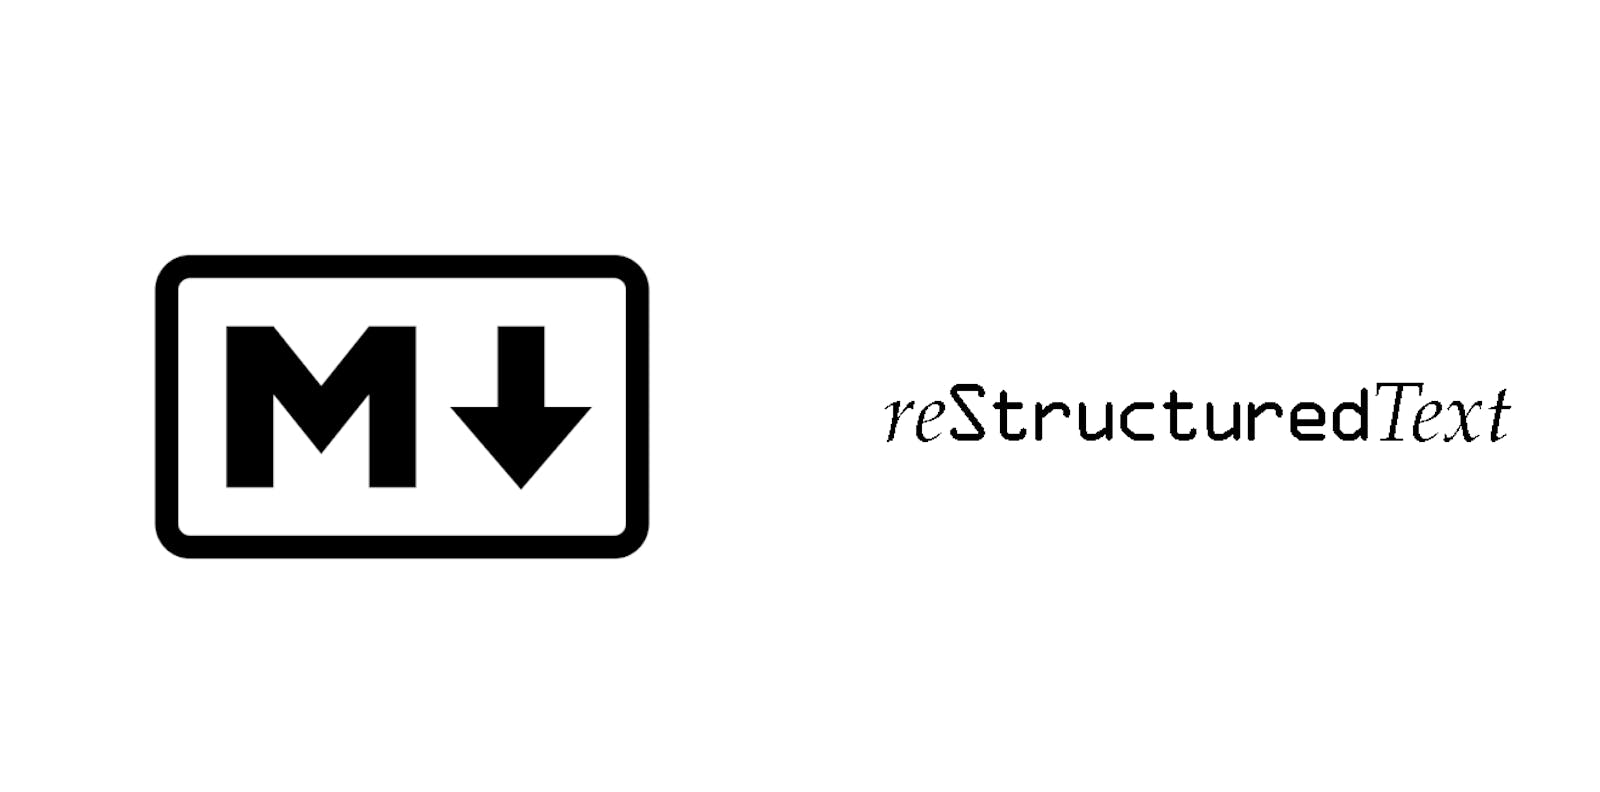 Markdown vs reStructured Text